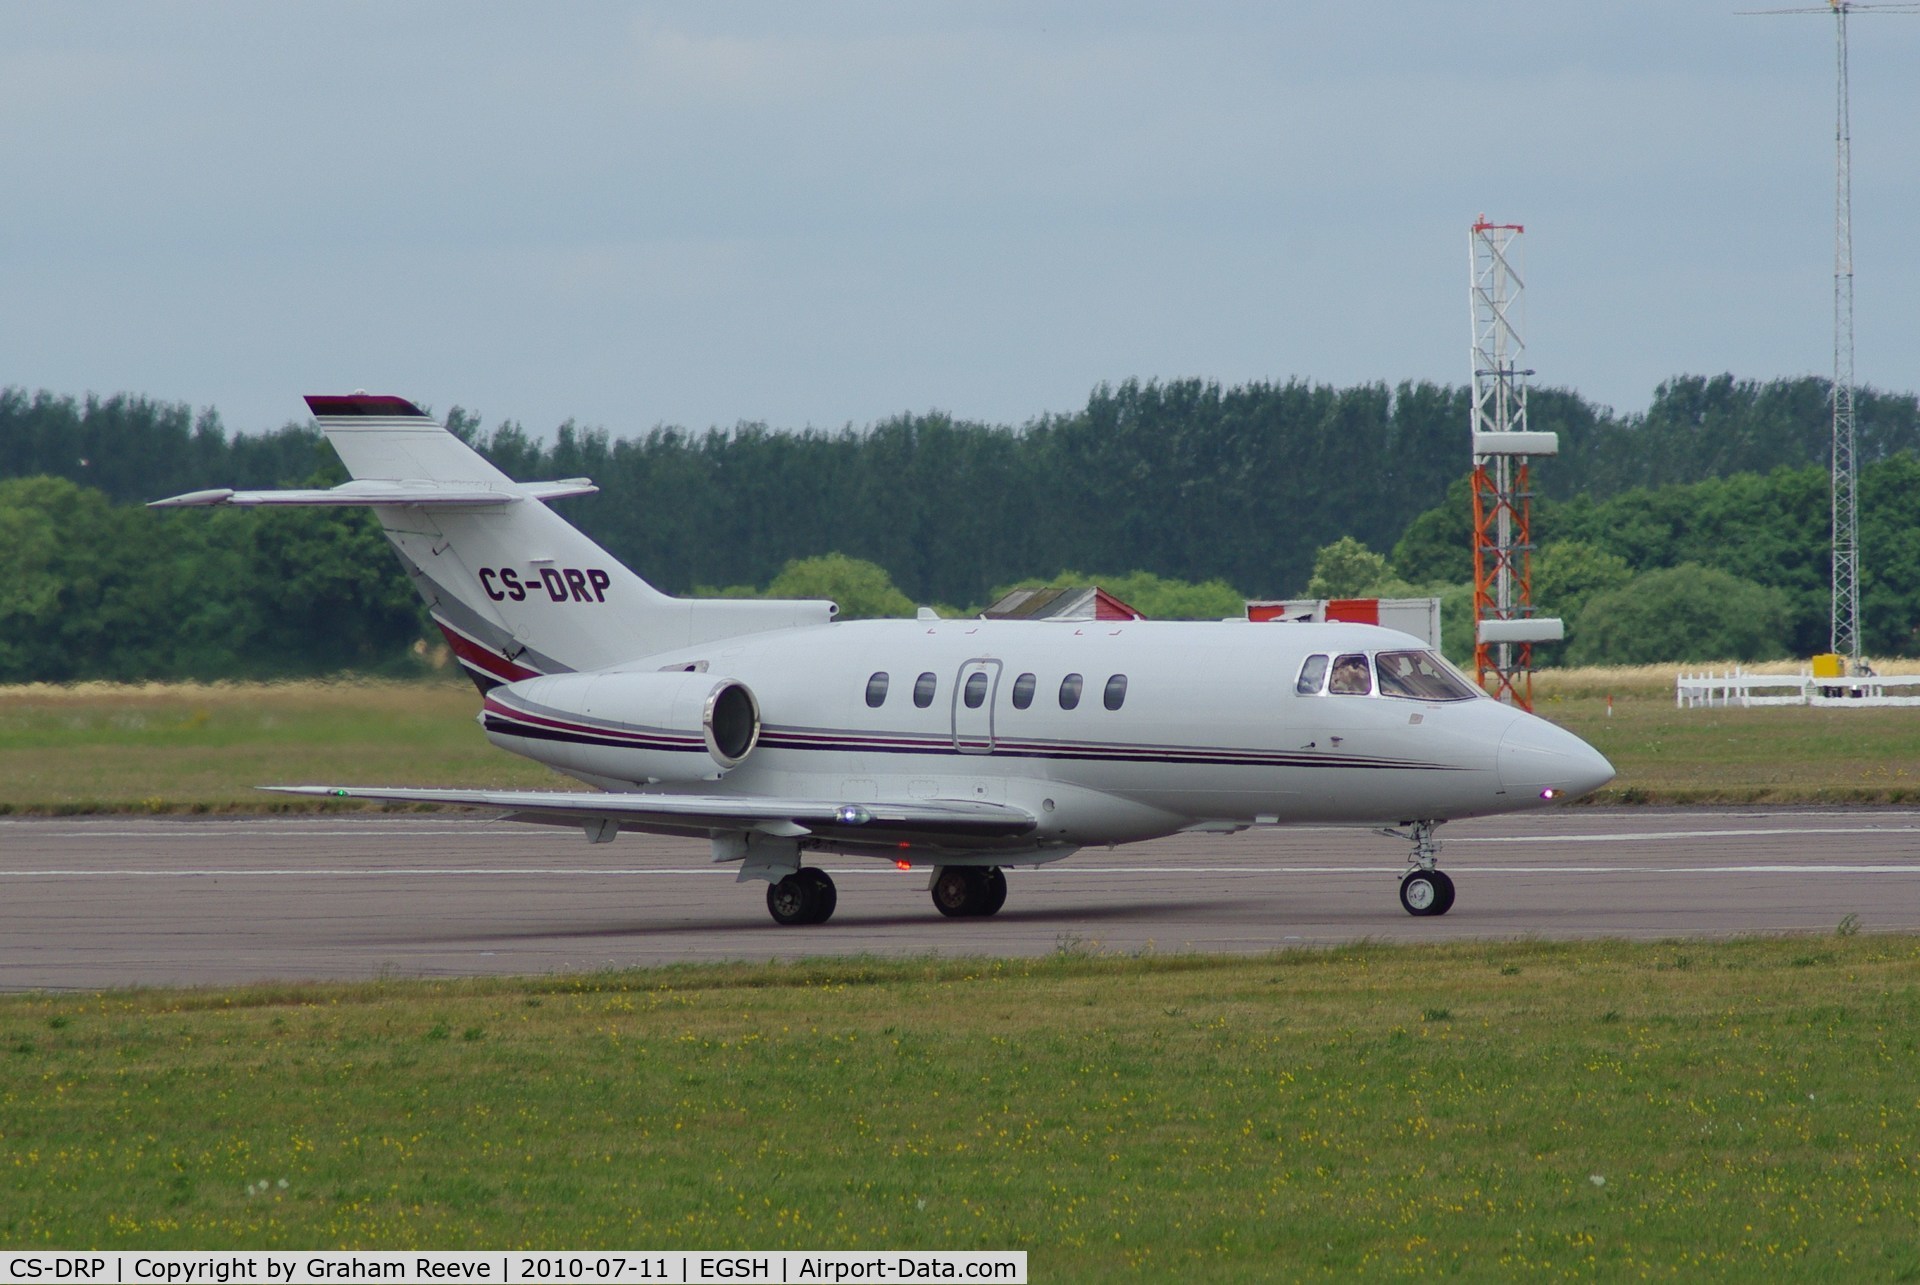 CS-DRP, 2006 Raytheon Hawker 800XP C/N 258779, Turning to line up for take off.